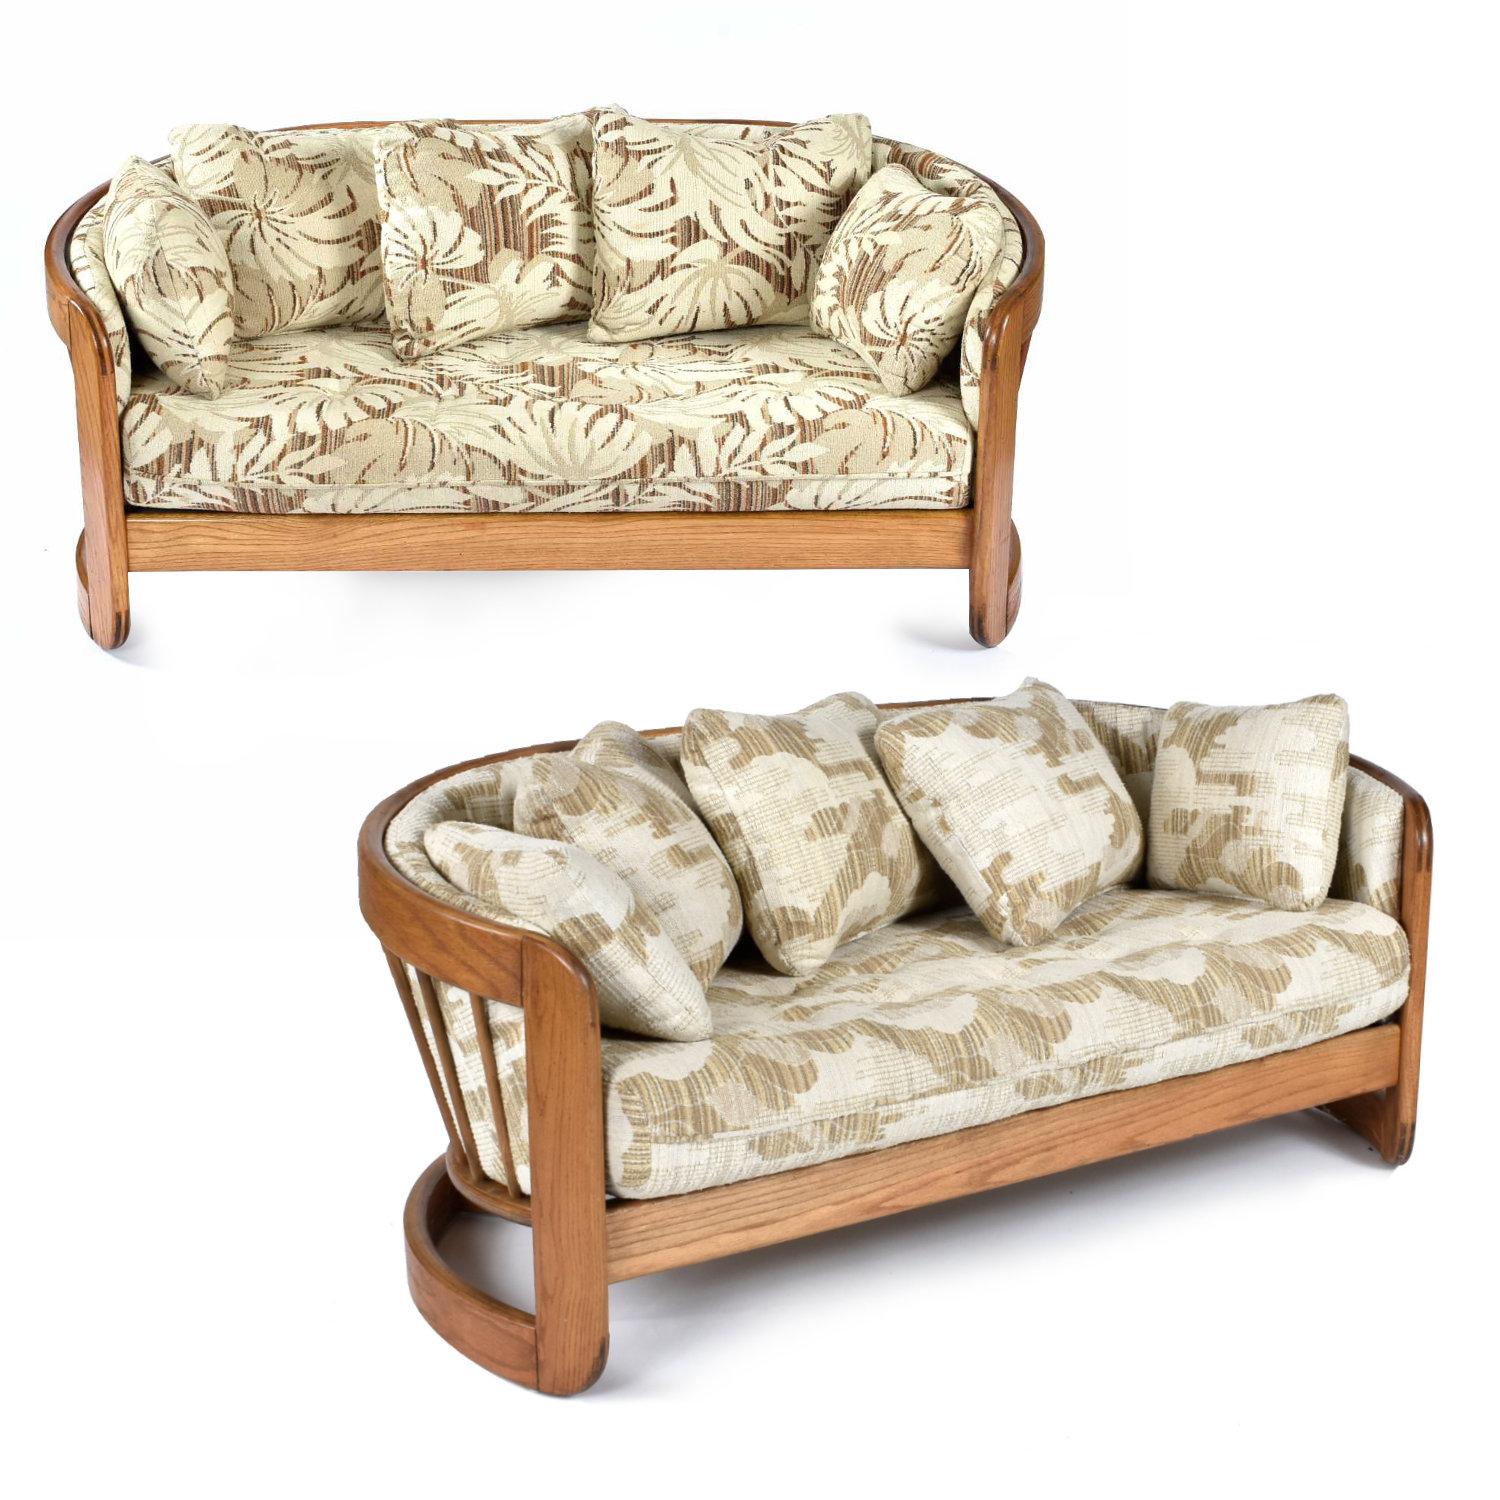 Pair of curved, solid oak loveseat sofas by Howard Furniture. The curved shape make these two loveseats ideal for placement as a pair. The crescent shape and ample cushions create a cozy, intimate seating arrangement. Solid oak throughout with